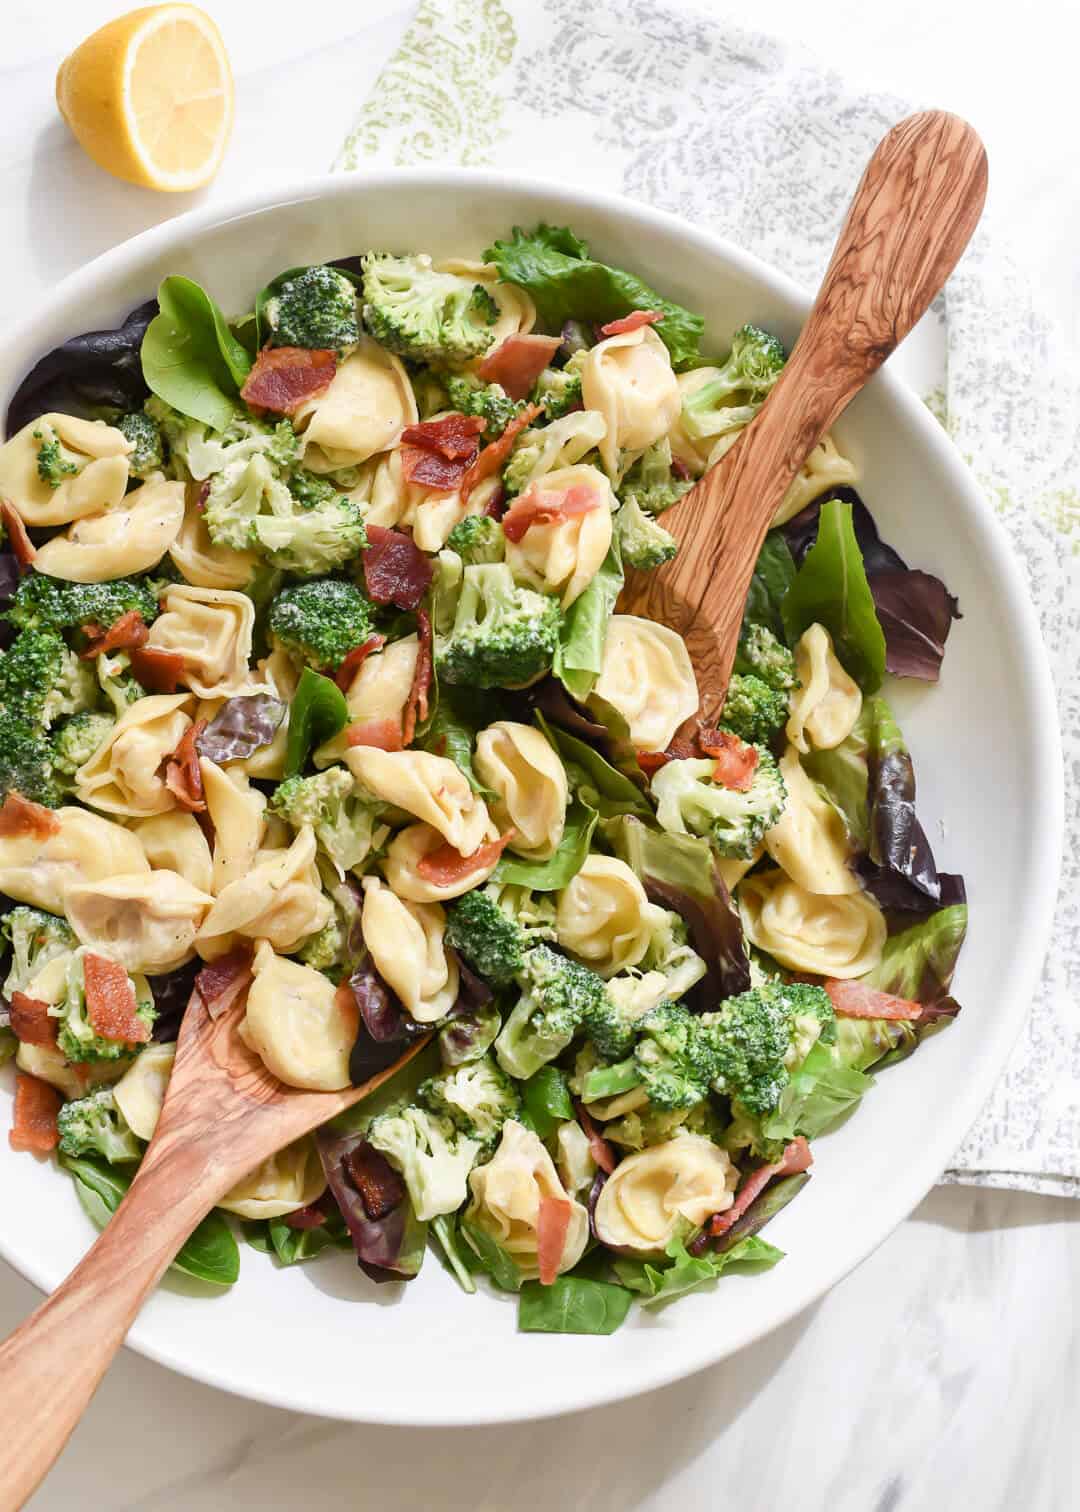 A bowl of spinach topped with tortellini and broccoli.